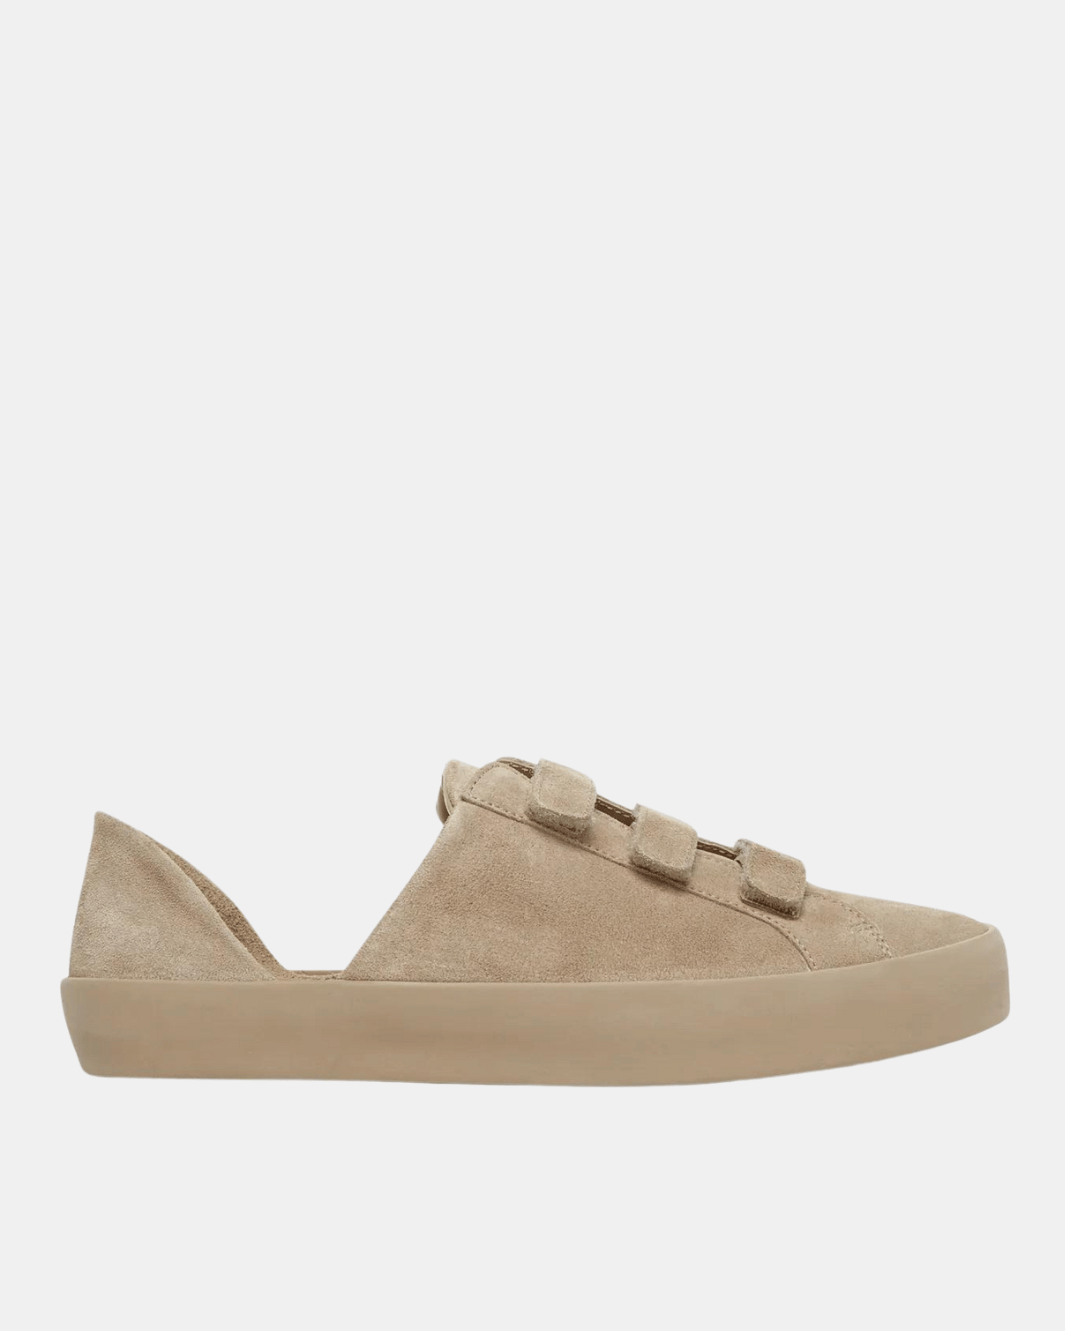 LIBBY D'ORSAY SNEAKER IN STUCCO SUEDE - Romi Boutique